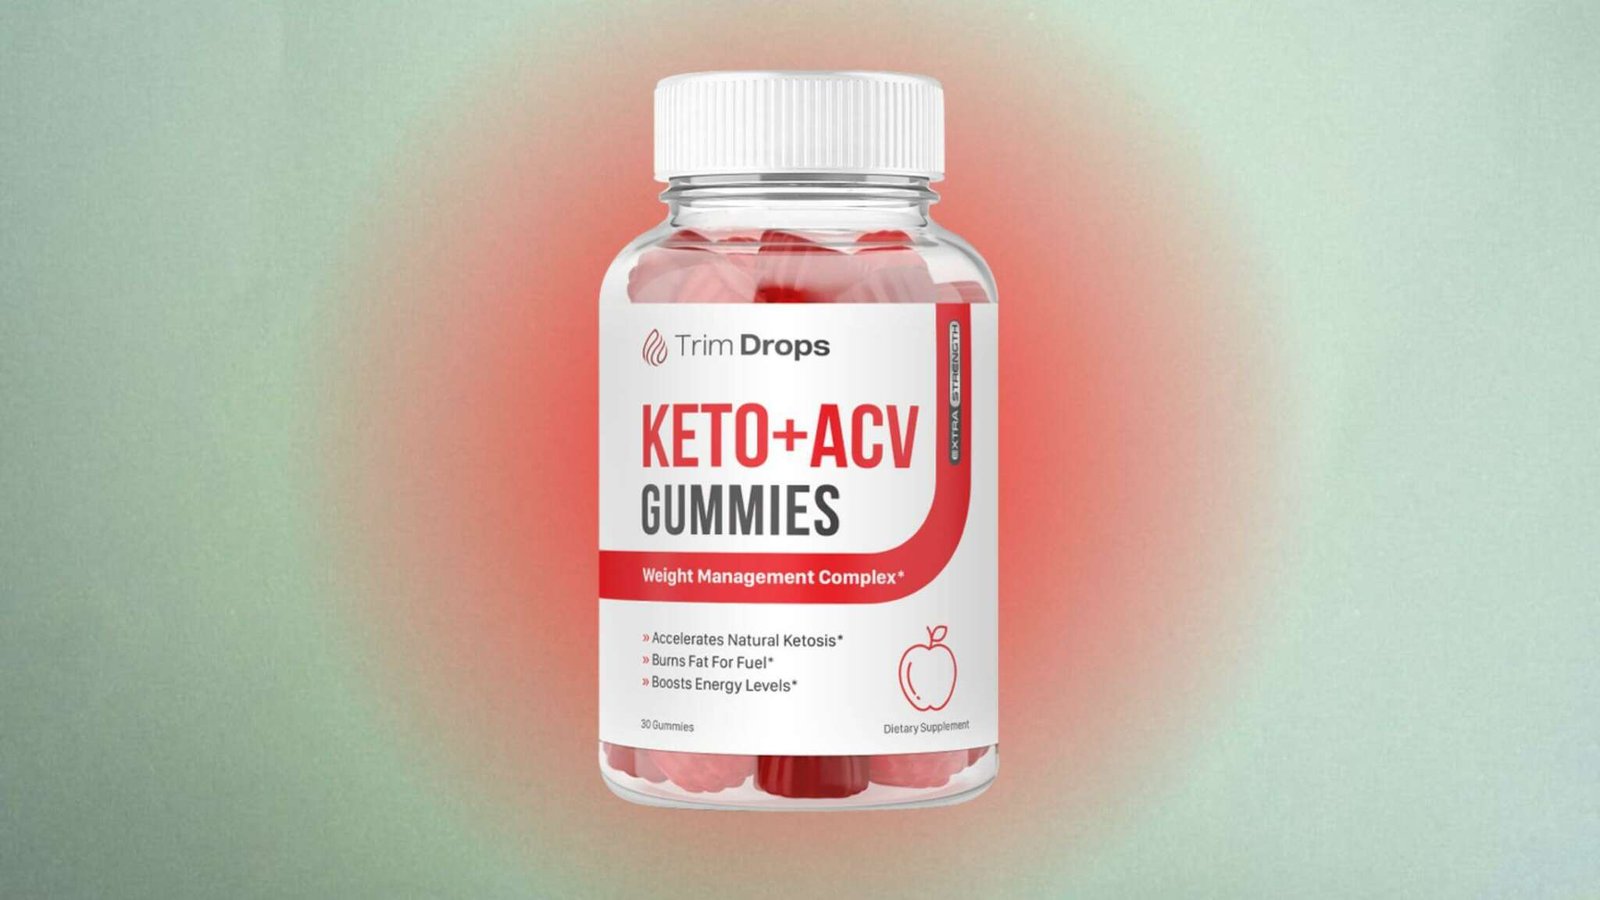 Trim Drops Keto + ACV Gummies Reviews - Is It Safe To Use?